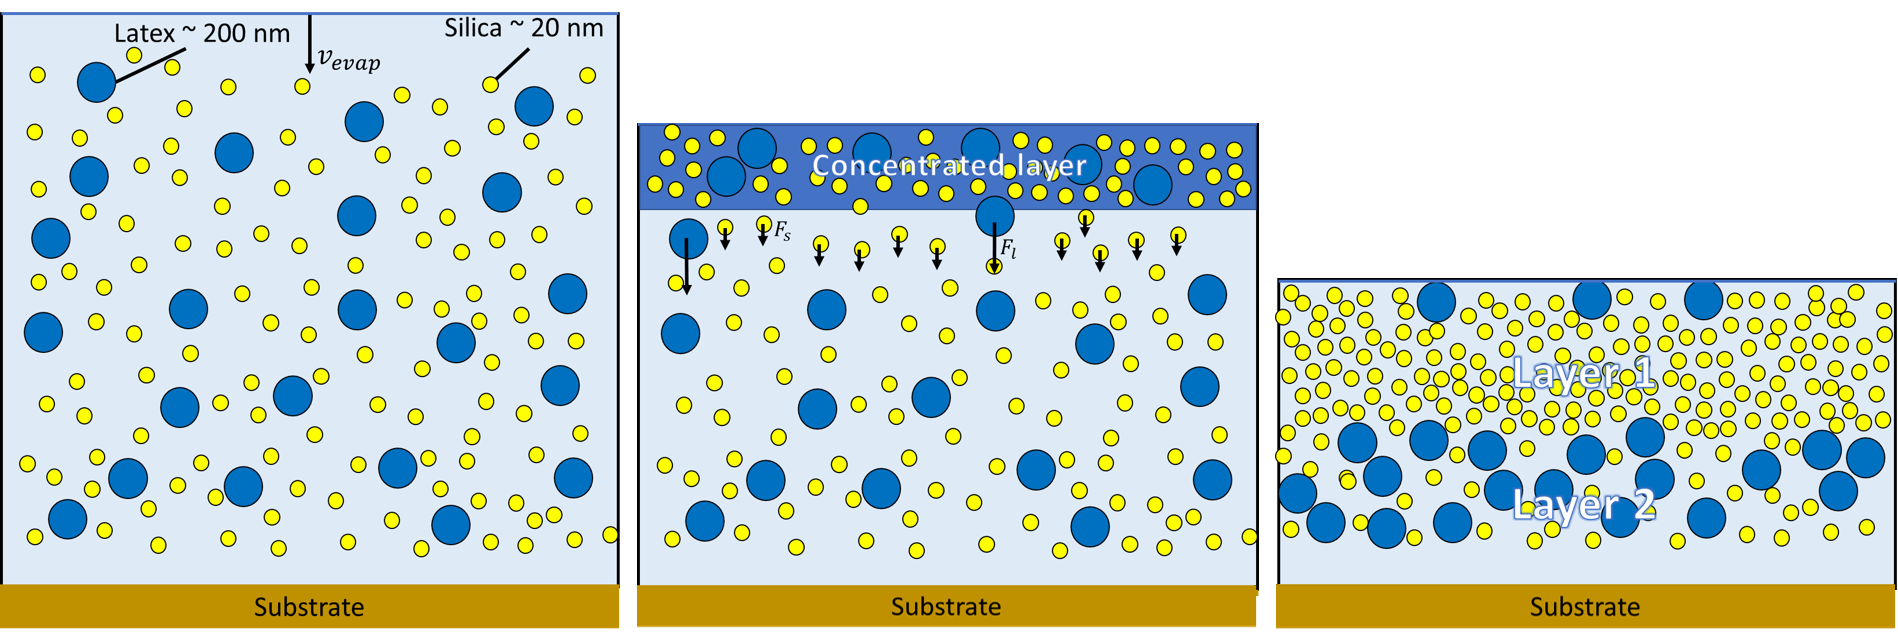 Schematic of Evaporating latex/silica mixture. The concentration gradient occurs due to the evaporating water at the top. This creates the concentration gradient and therefore the diffusiophoretic force. Finally ,leading to a dry sample with a higher concentration of silica at the top.